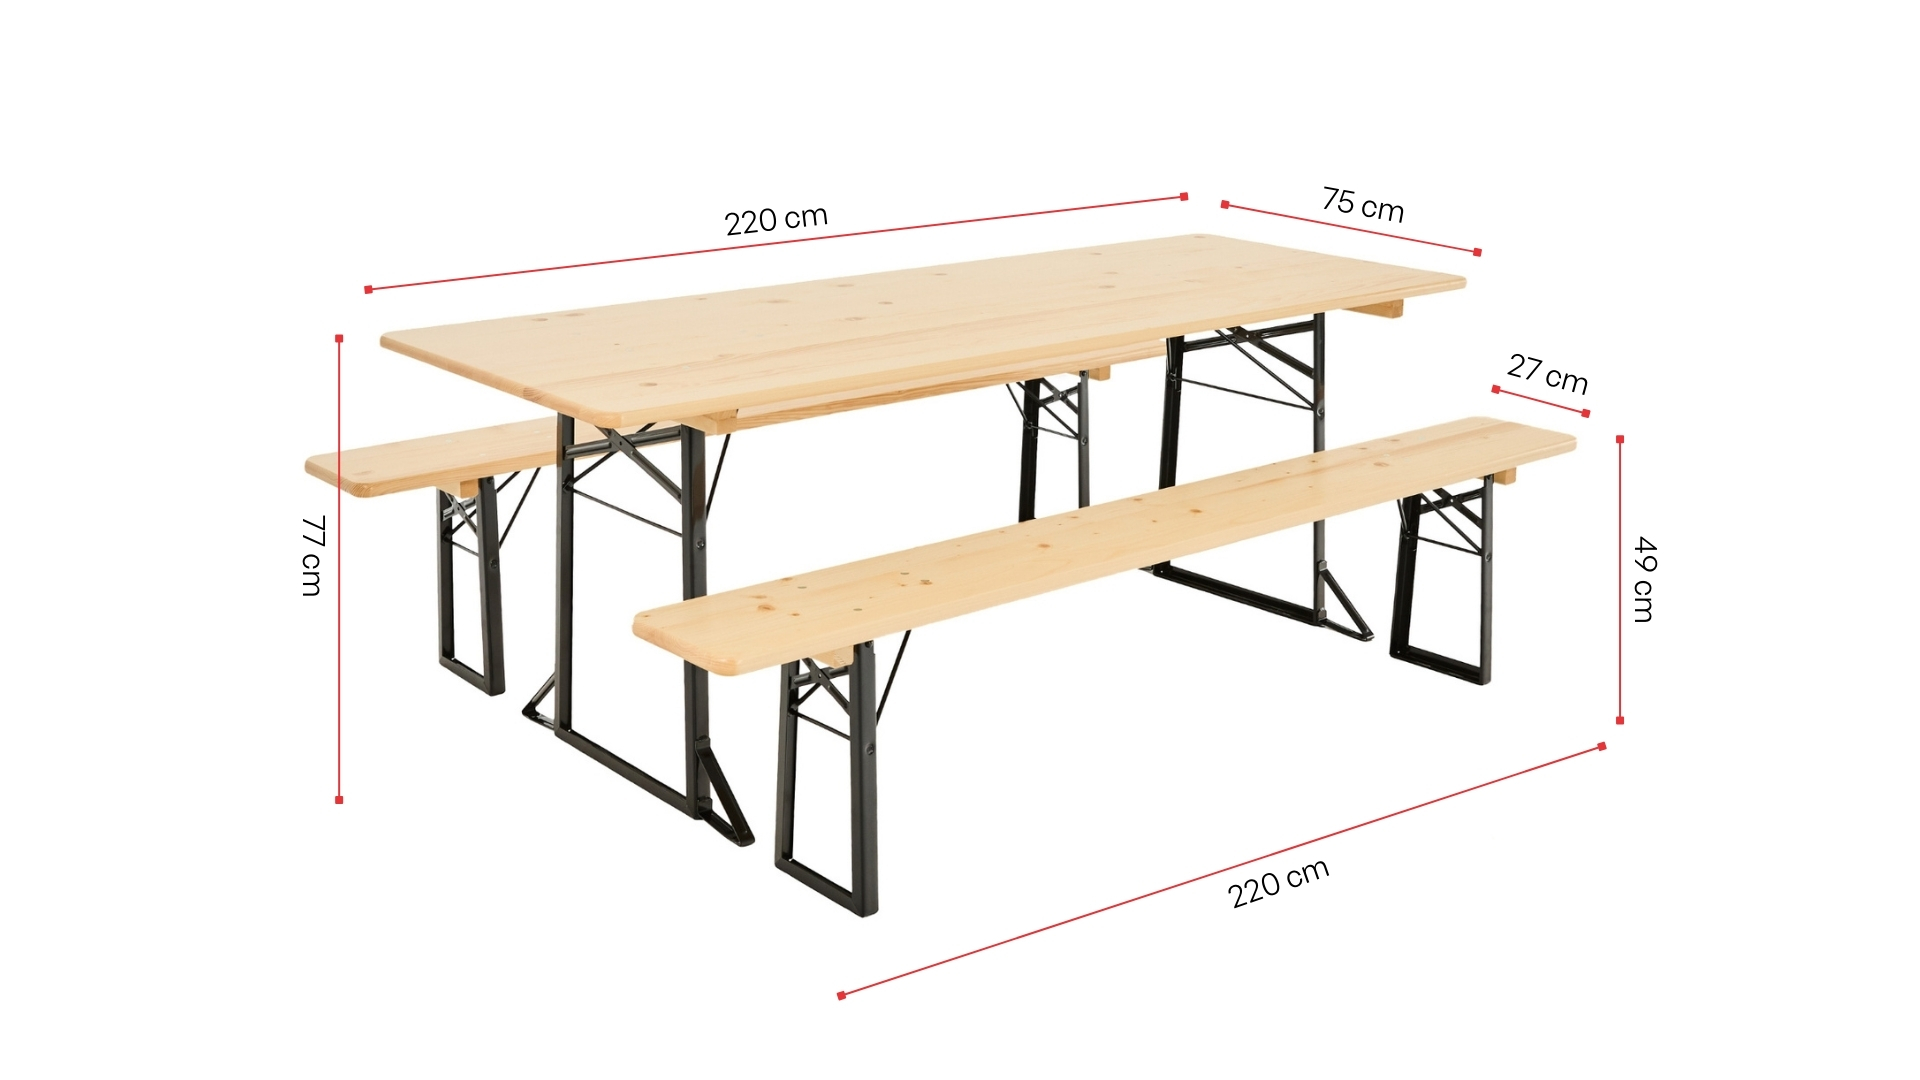 Wide beer garden table set is shown with its dimensions.